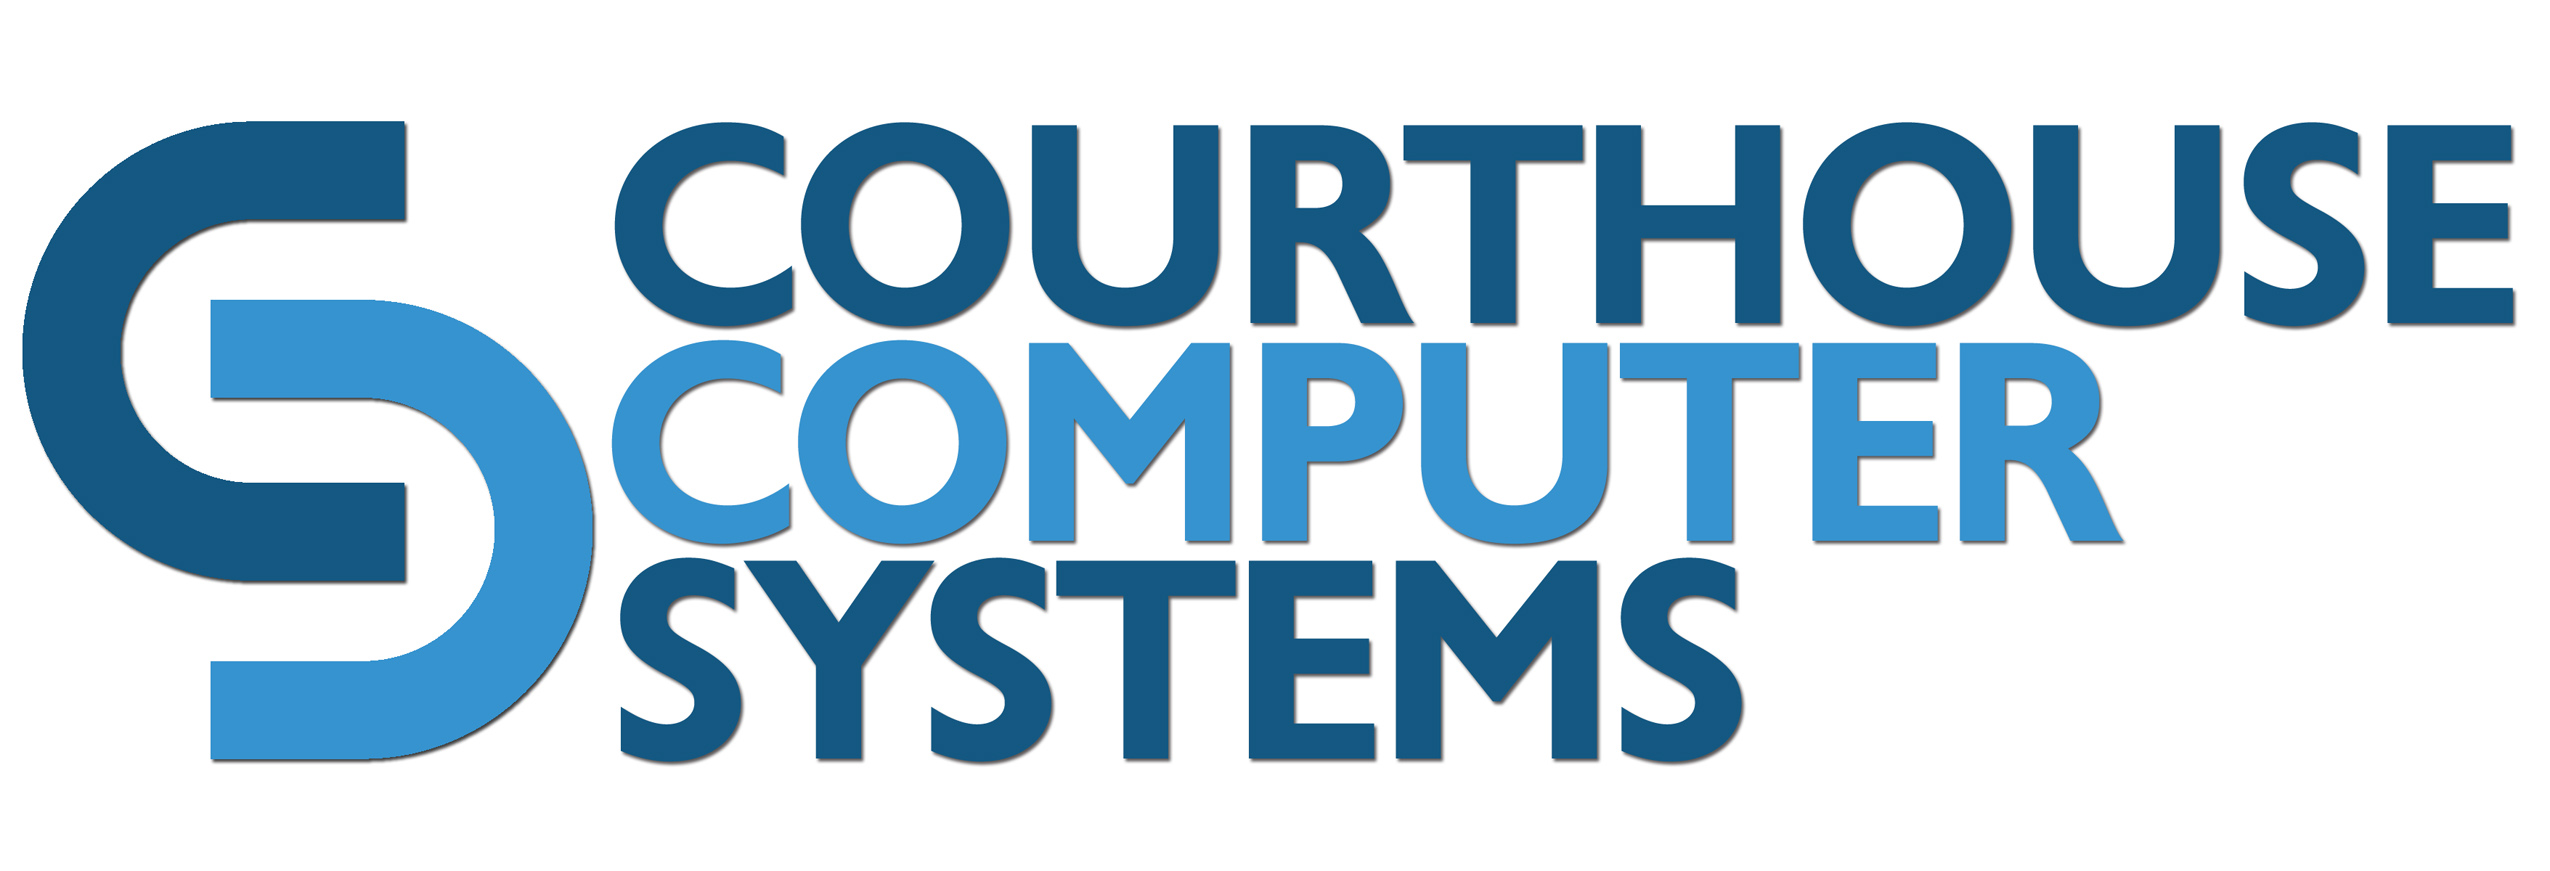 Courthouse Computer Systems